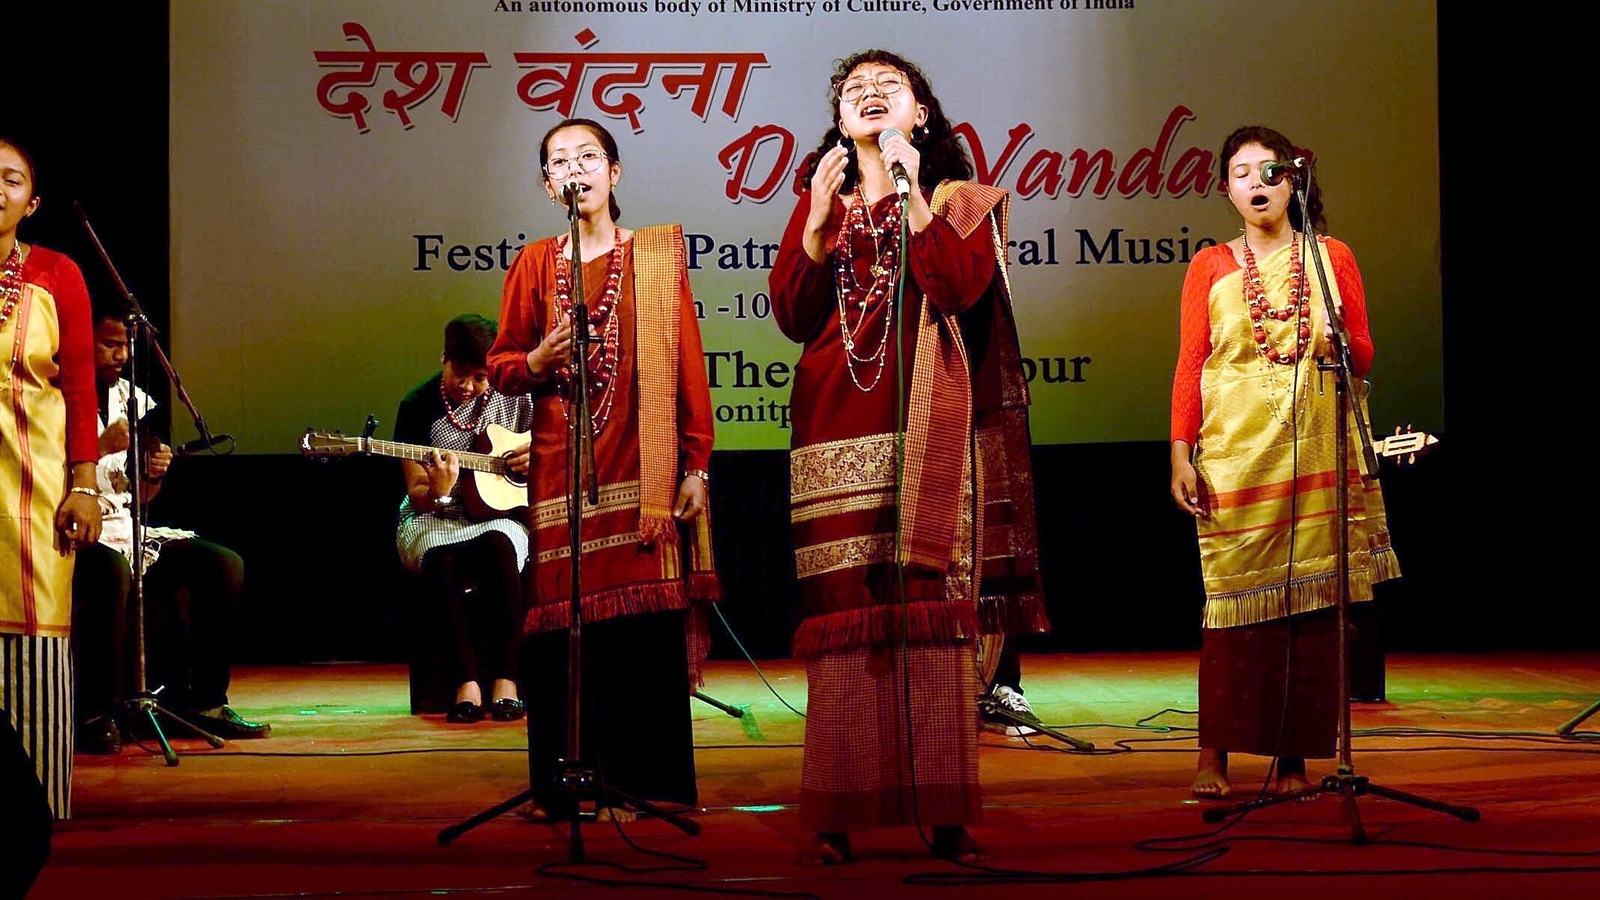 Meghalaya govt launches project to promote music, support budding ...